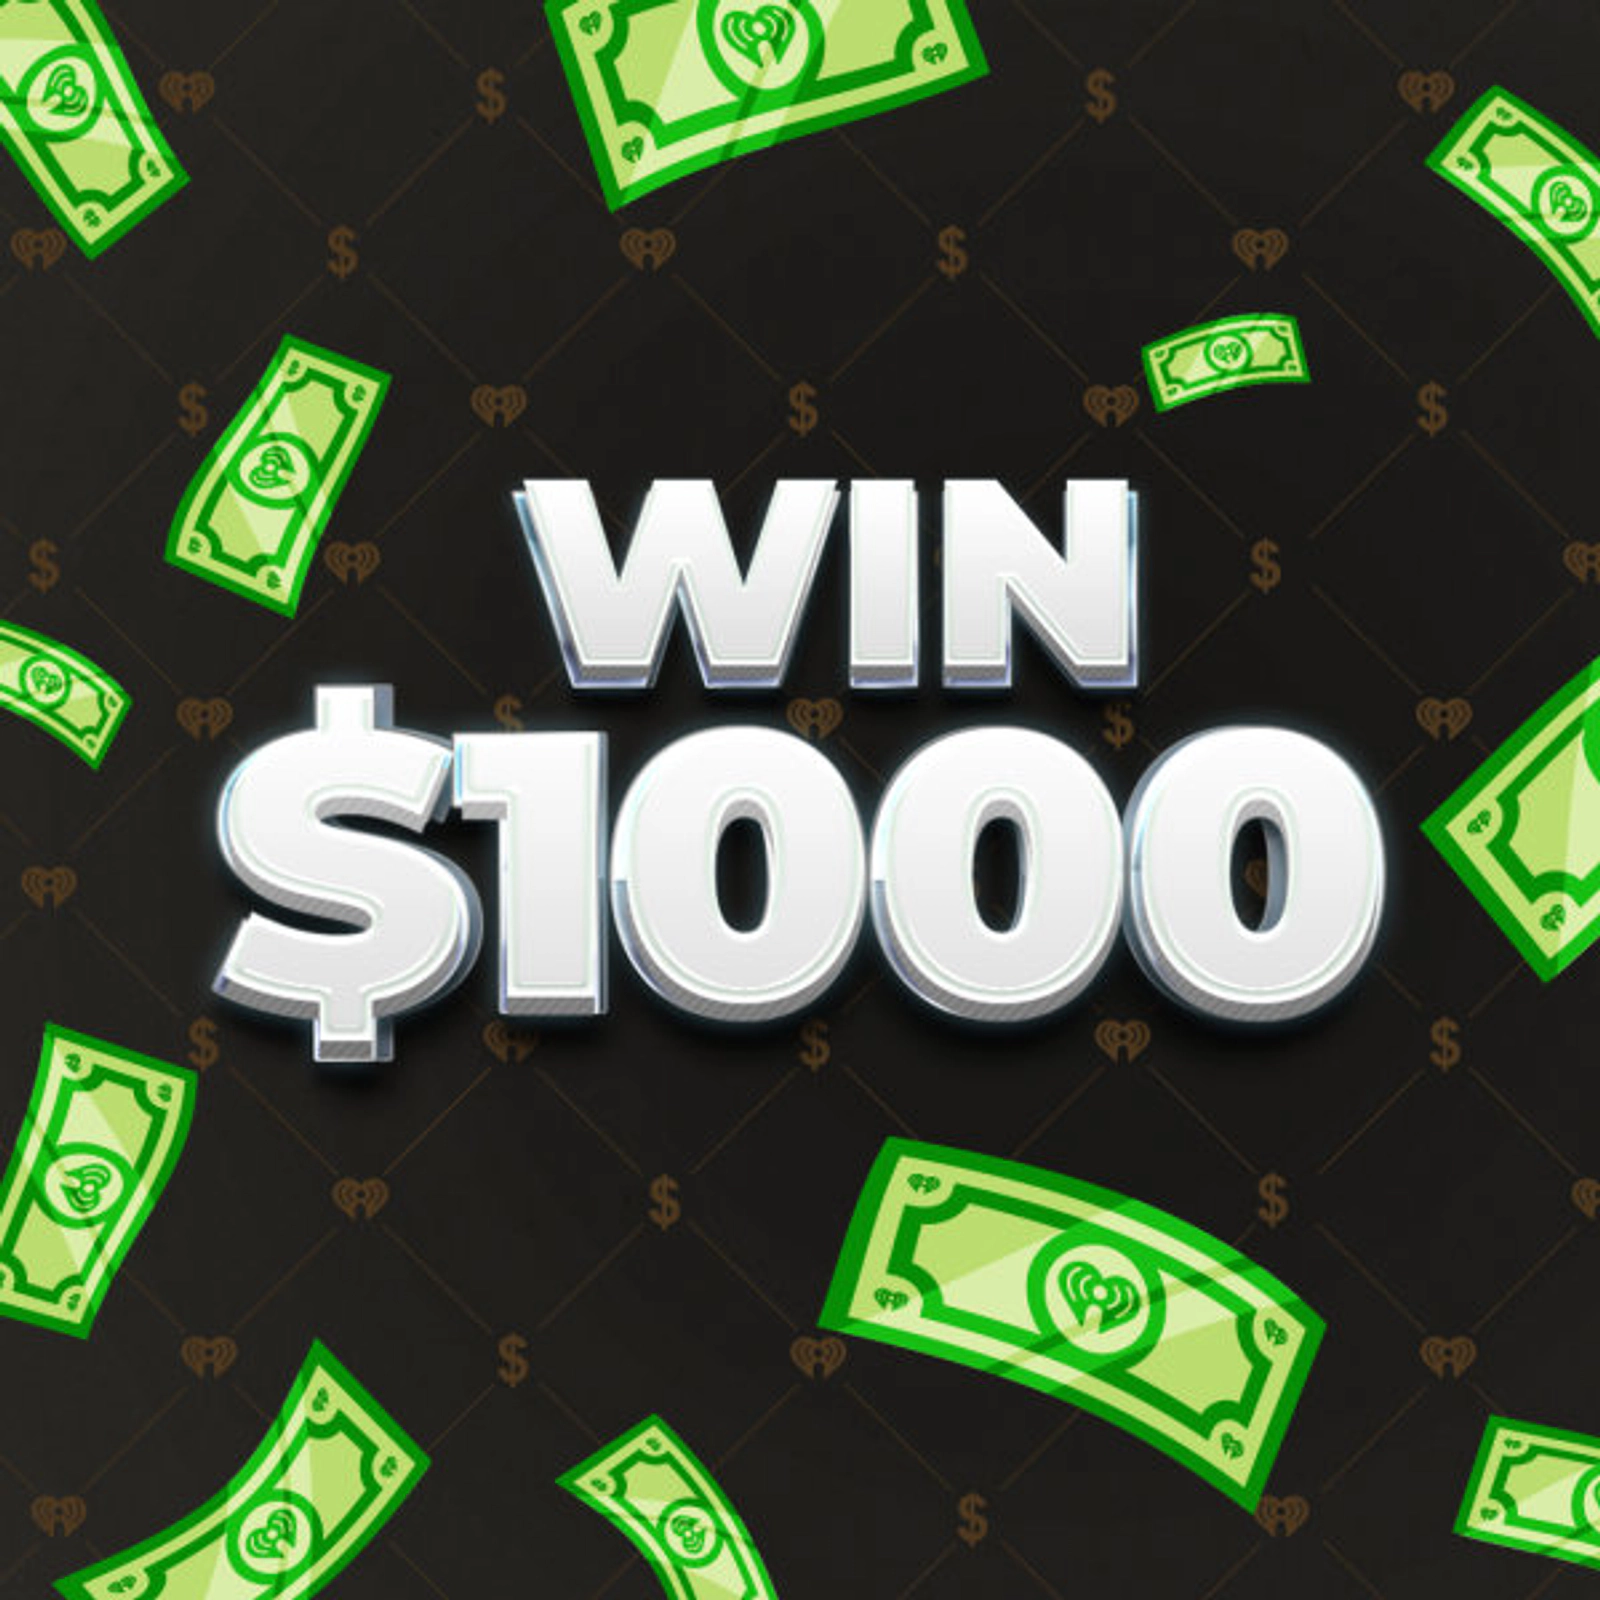 Listen to Win a Grand in your hand!  - Thumbnail Image